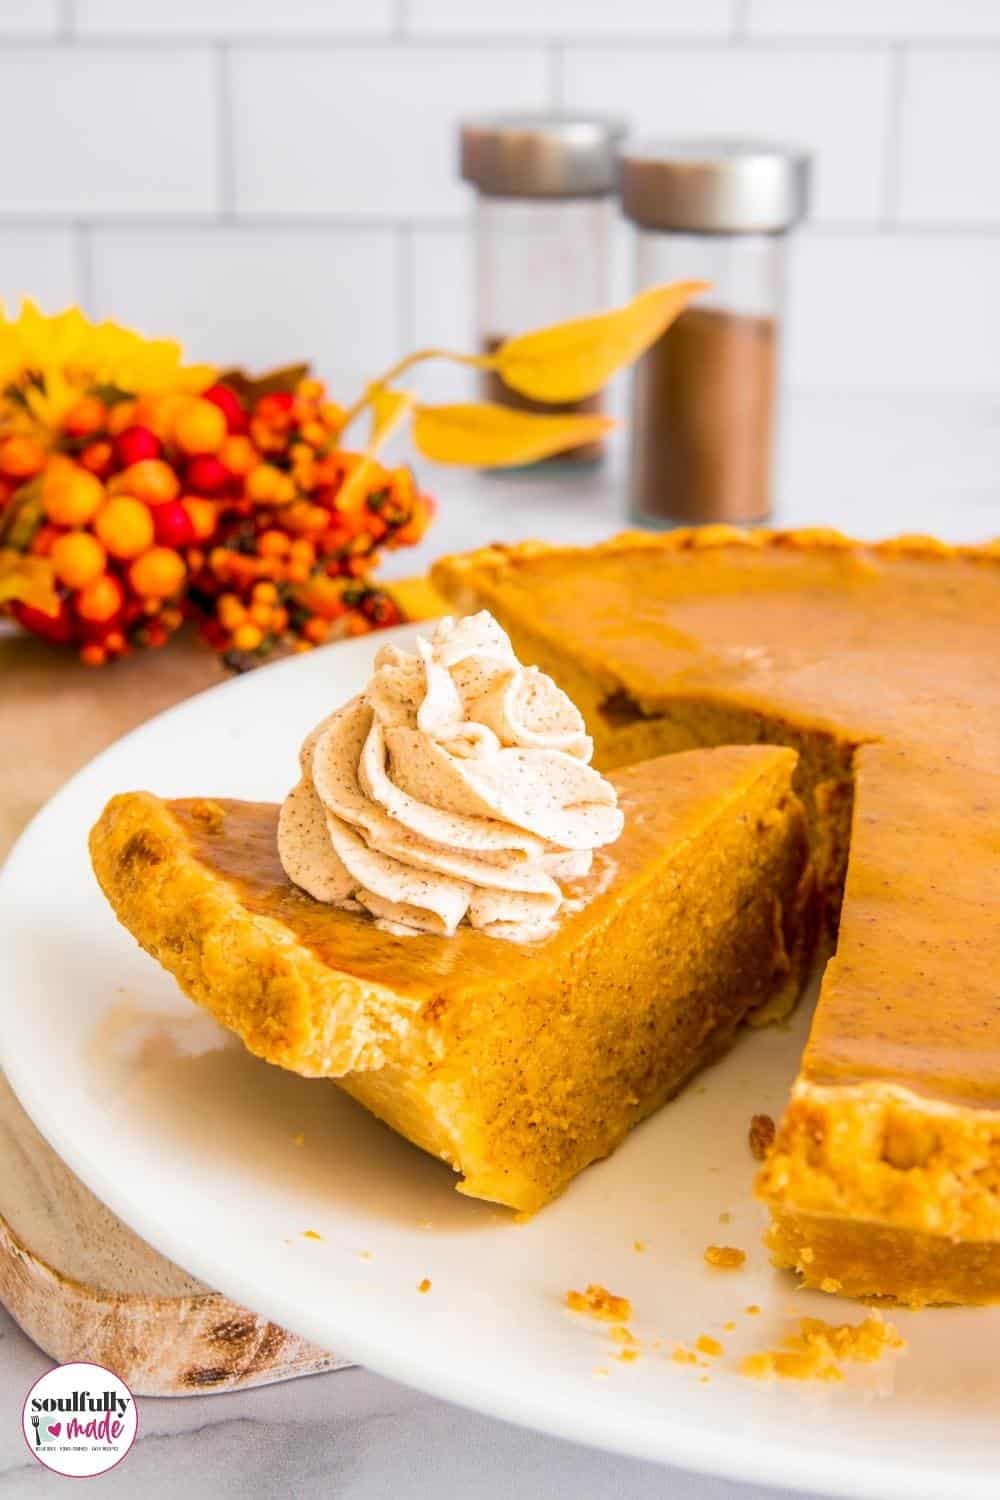 Pumpkin Pie with Sweetened Condensed Milk - Soulfully Made